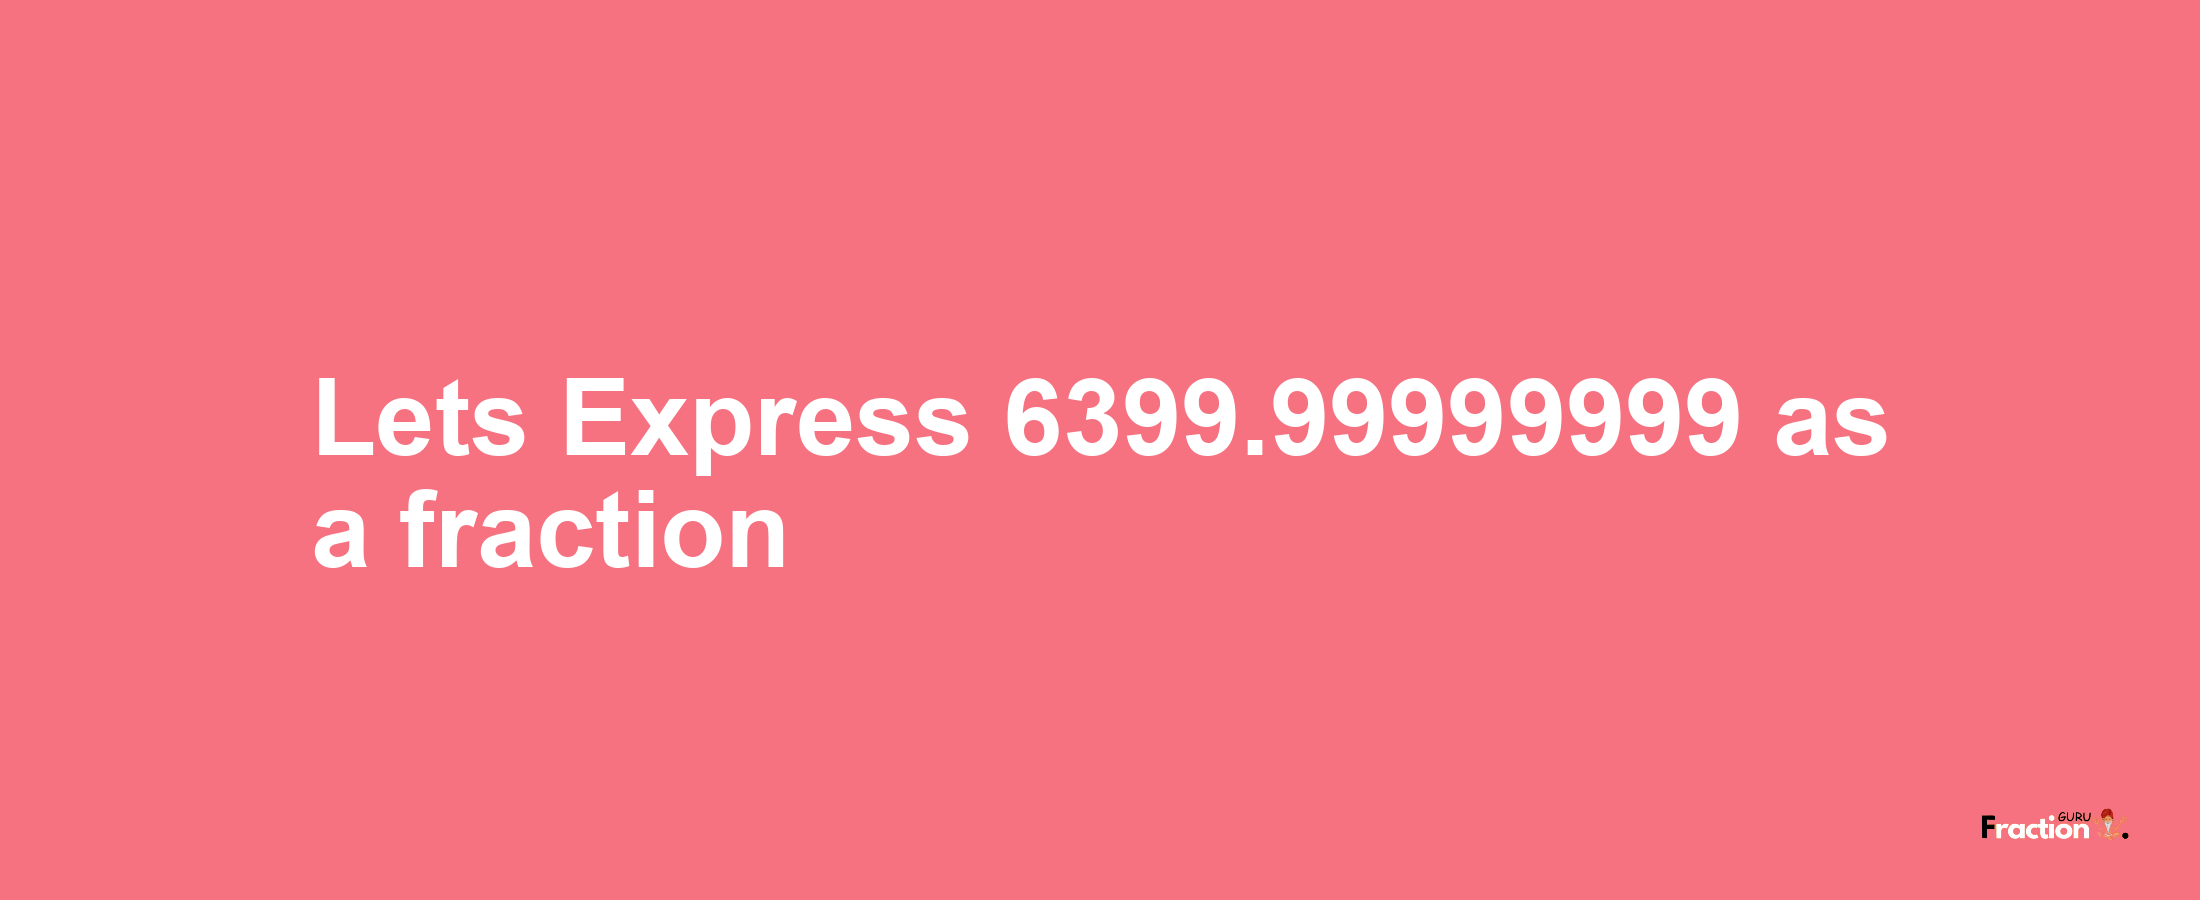 Lets Express 6399.99999999 as afraction